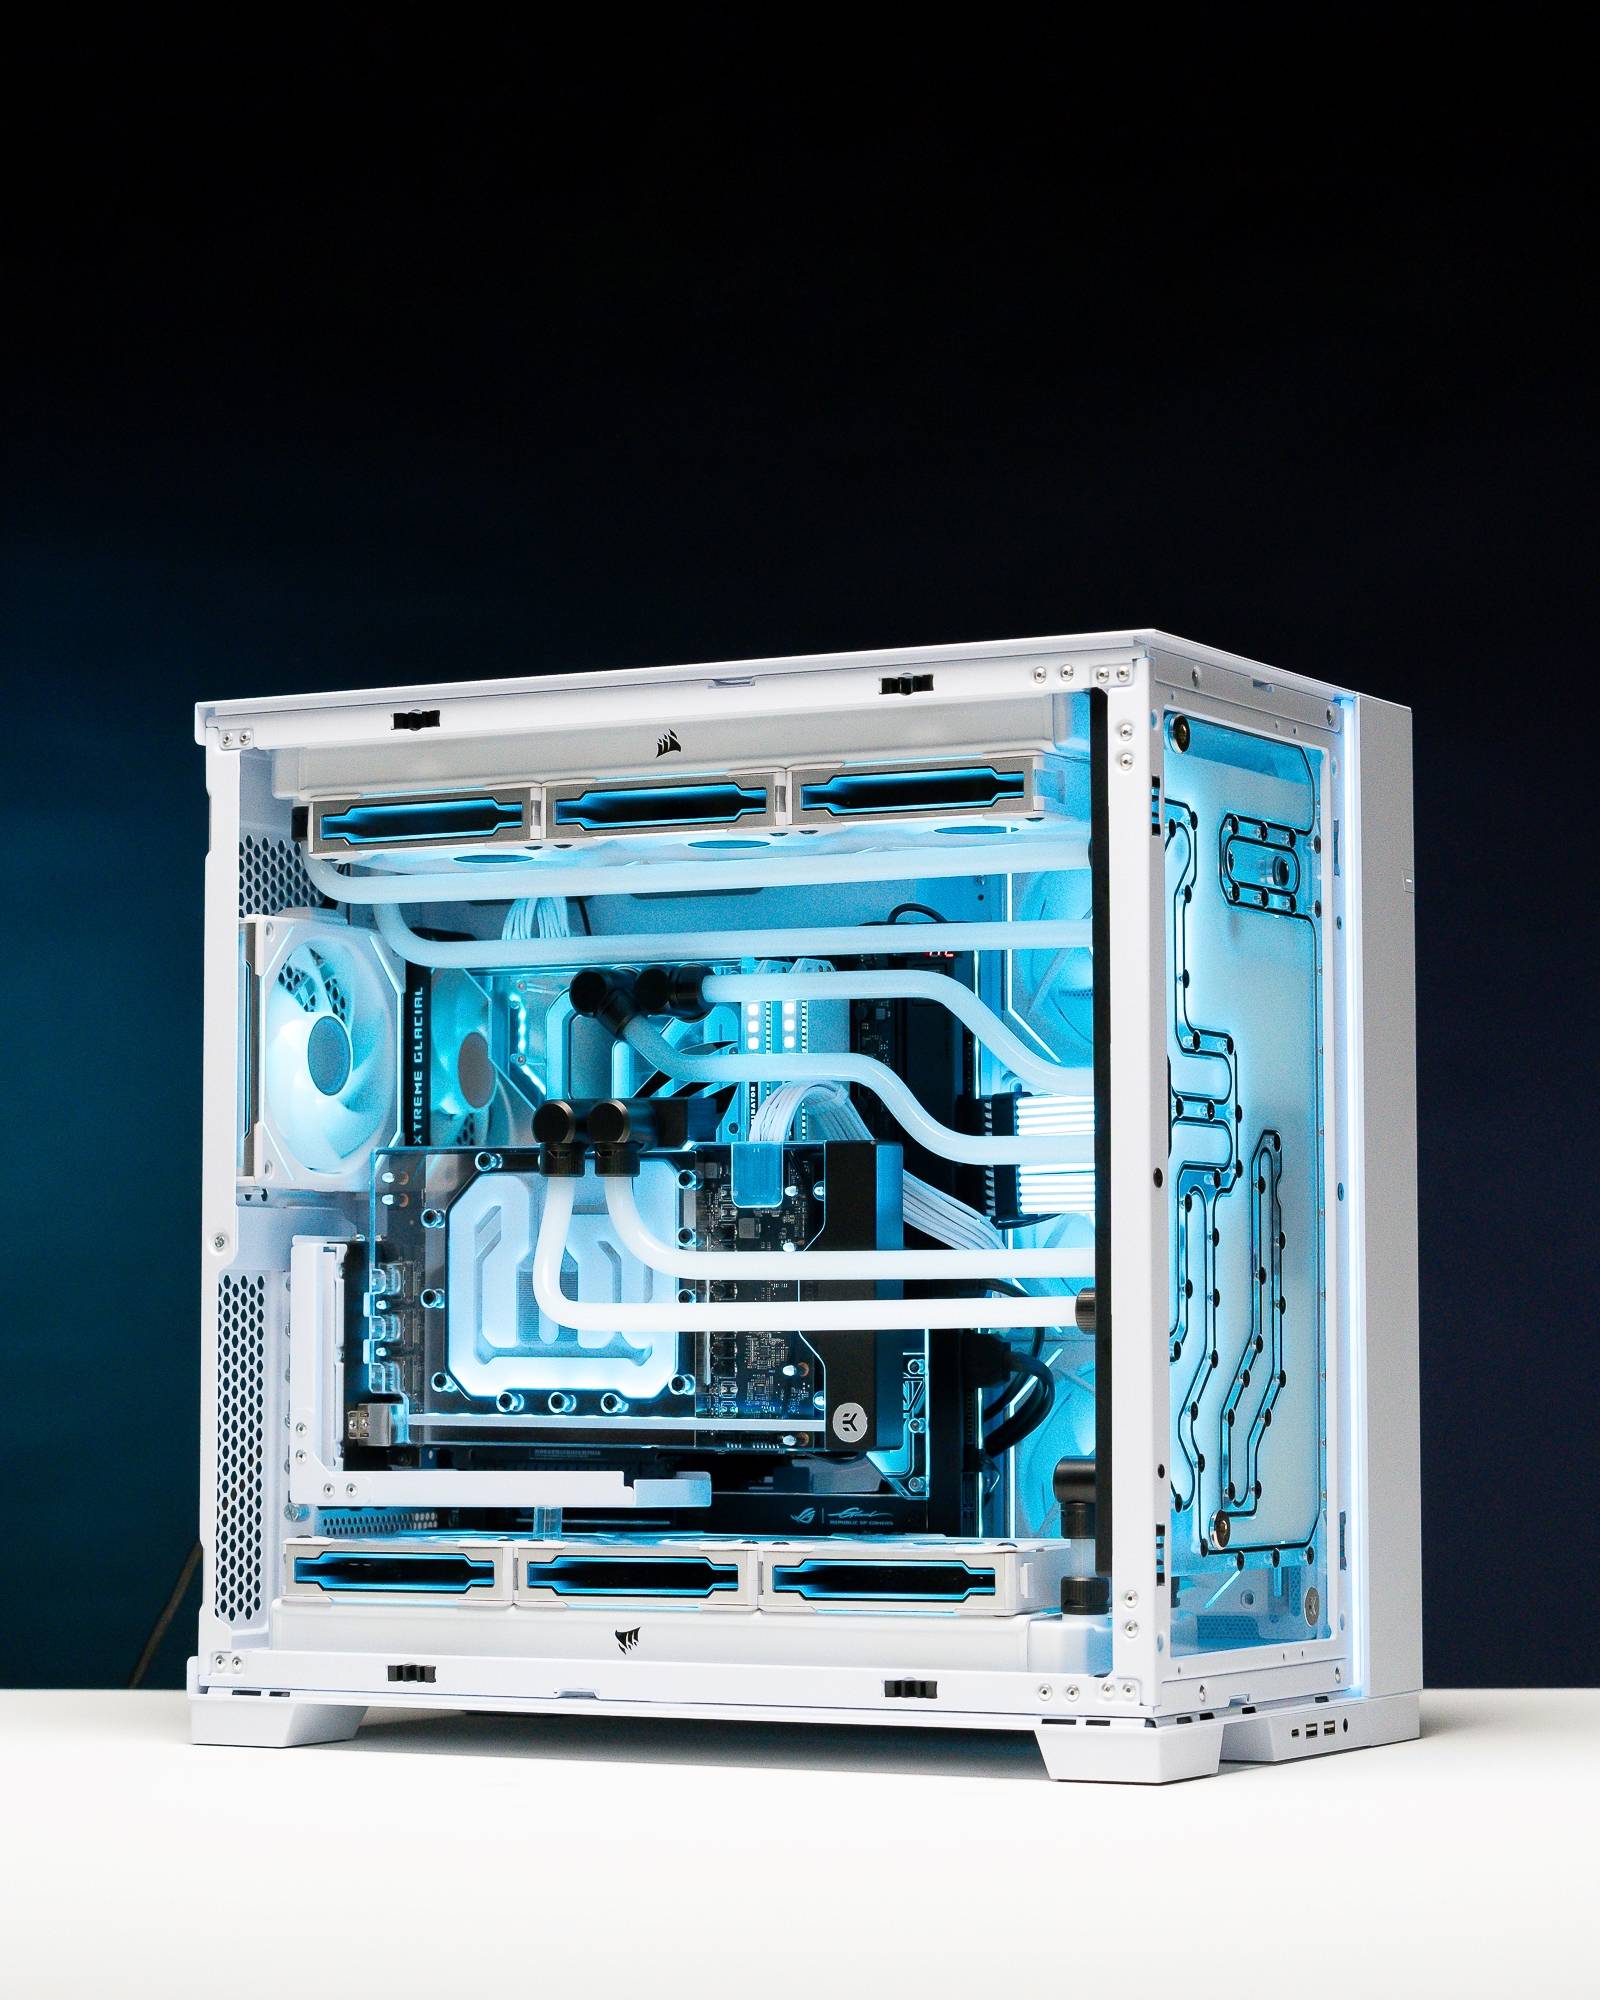 A fully water blue themed water cooled pc